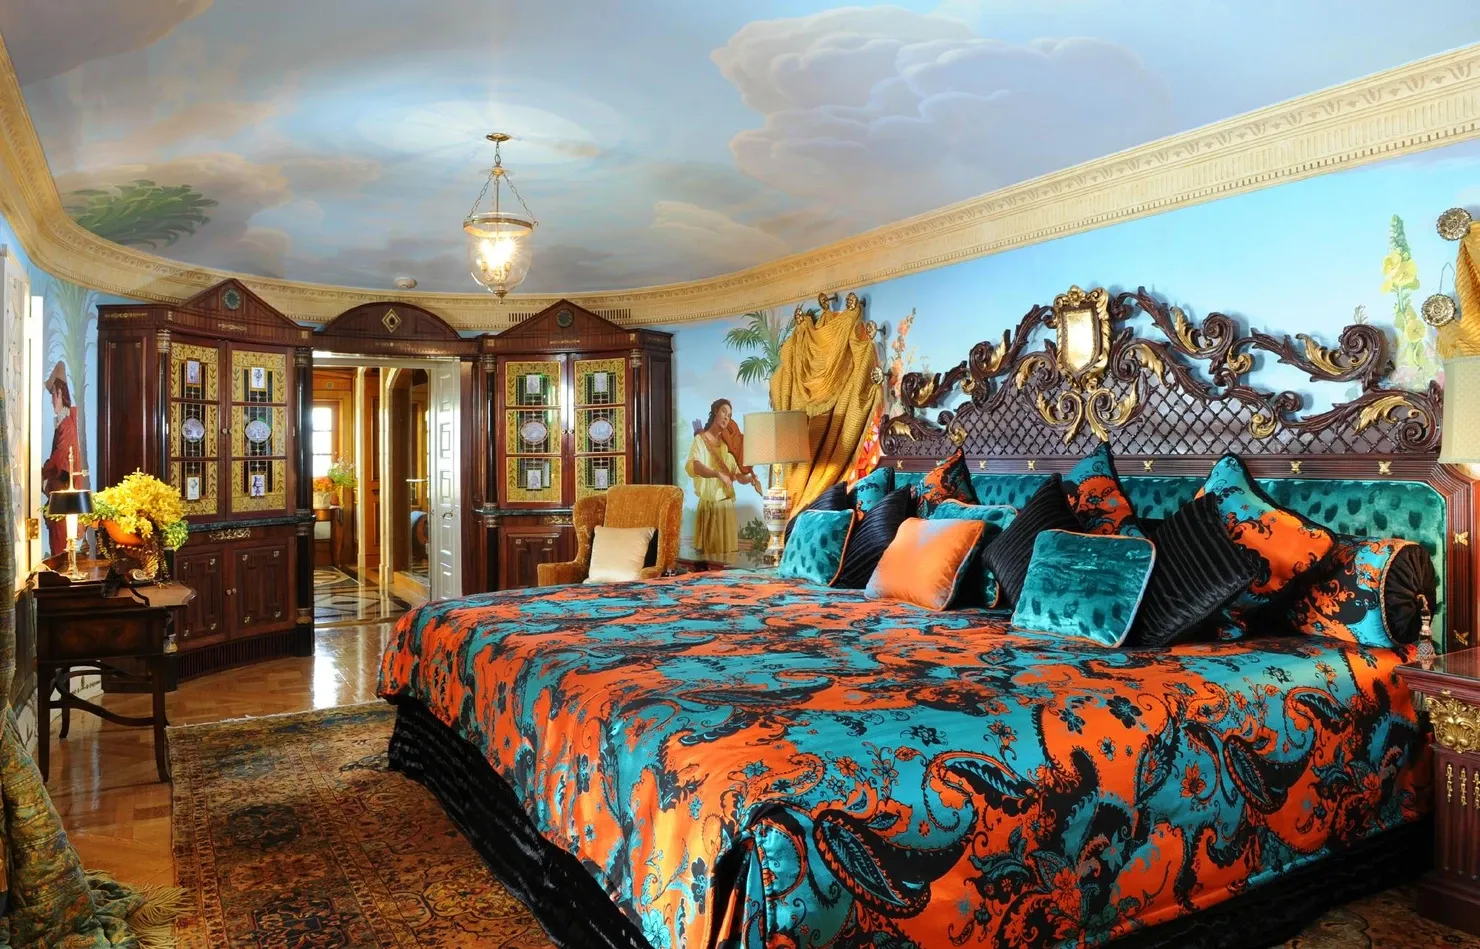 Versace's former bedroom turned into hotel room